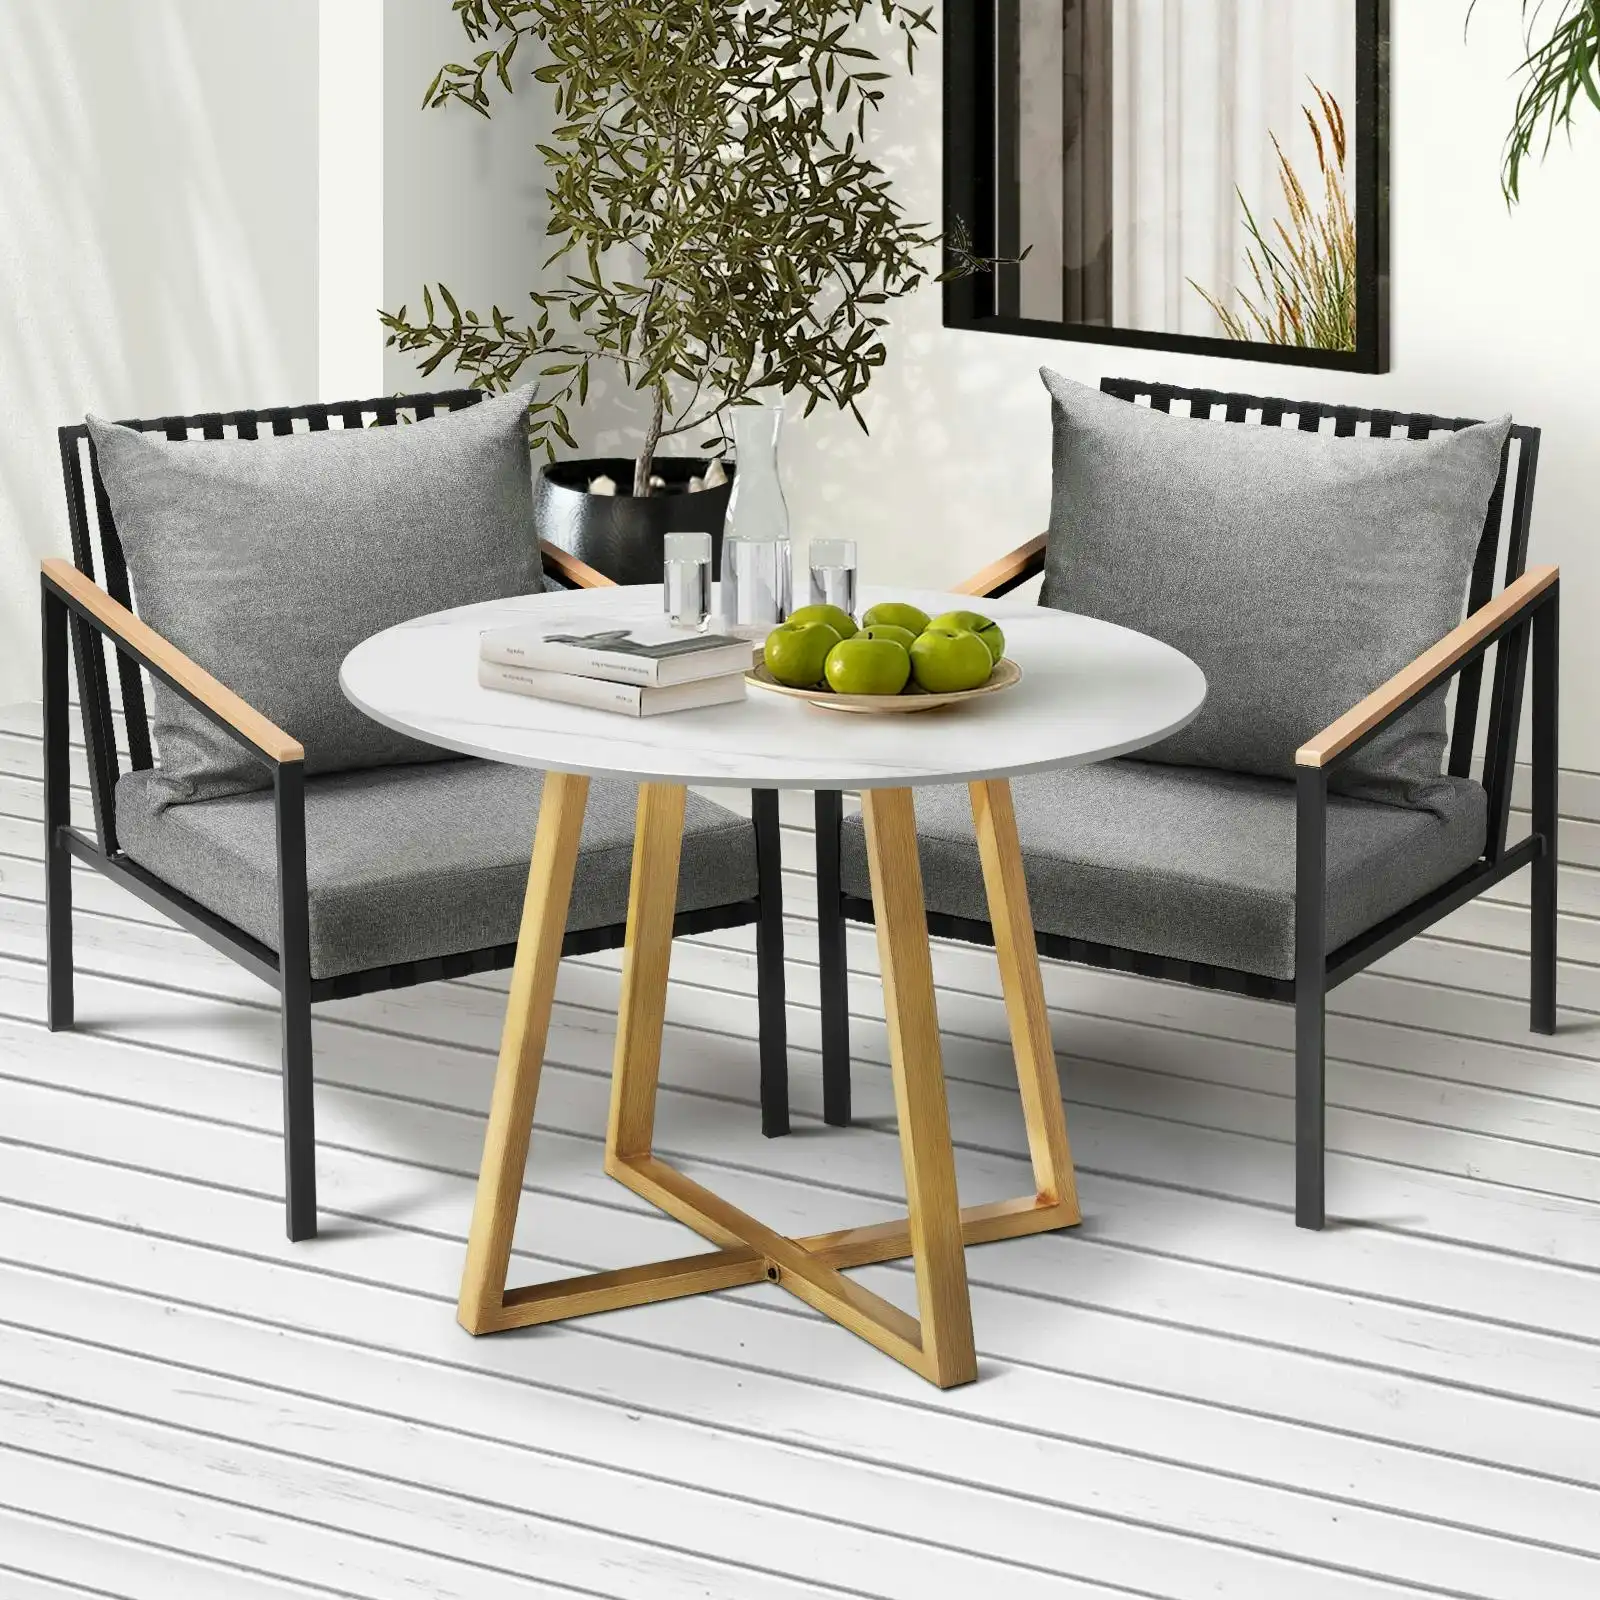 Livsip 3 Piece Outdoor Dining Setting Sintered Stone Table Patio Furniture Set